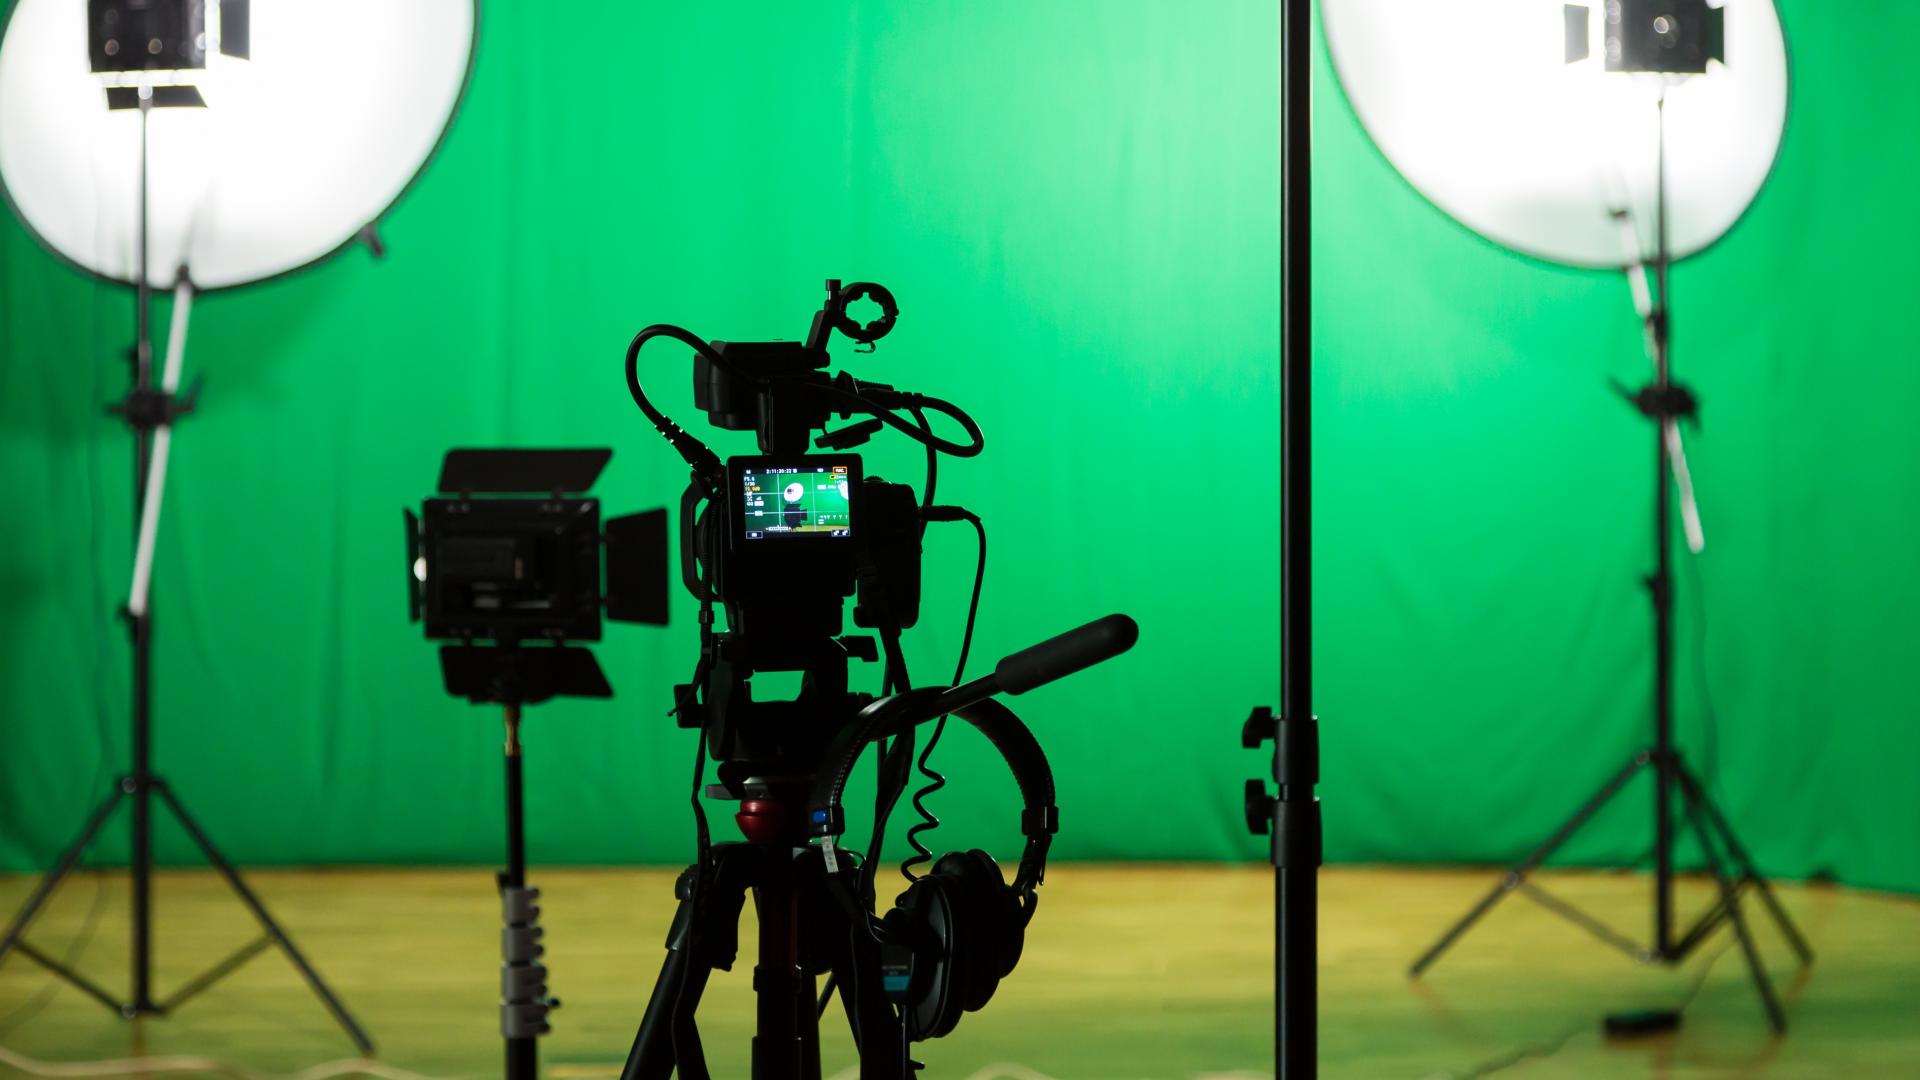 Green Screen Studios for Hire in Melbourne